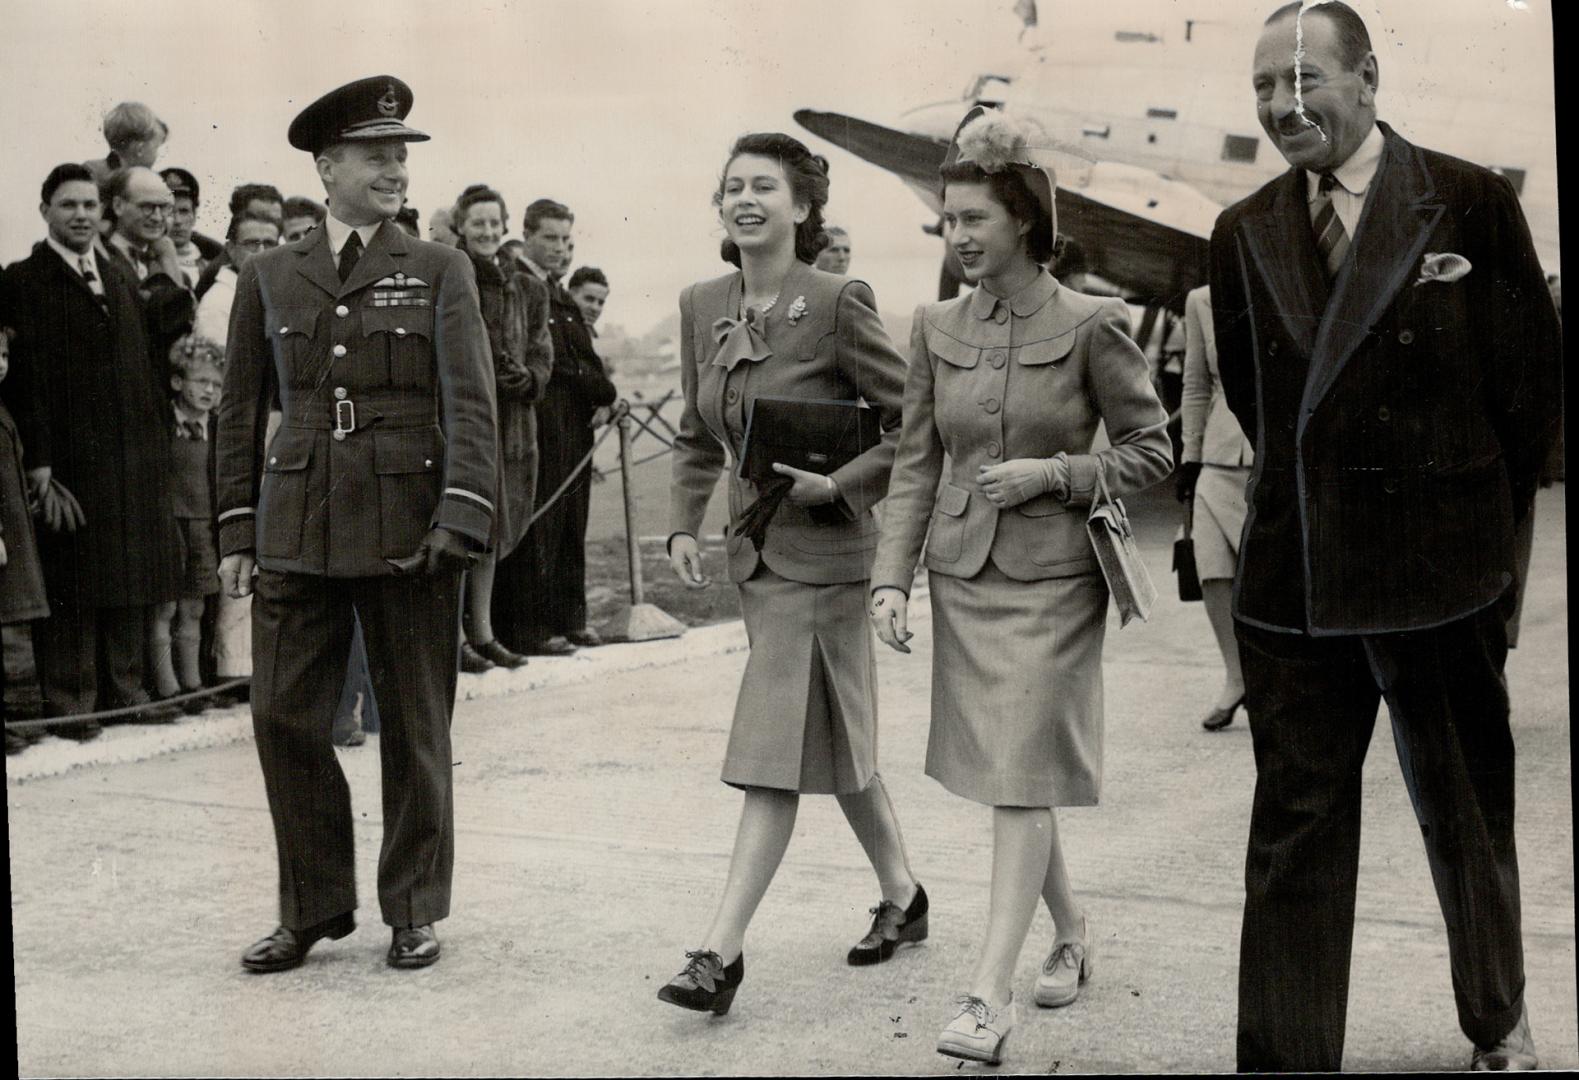 Princess Margaret is met by her betrothed sister, Princess Elizabeth, at London airport after the former had flown back from Northern Ireland launching of the new liner Edinburgh Castle